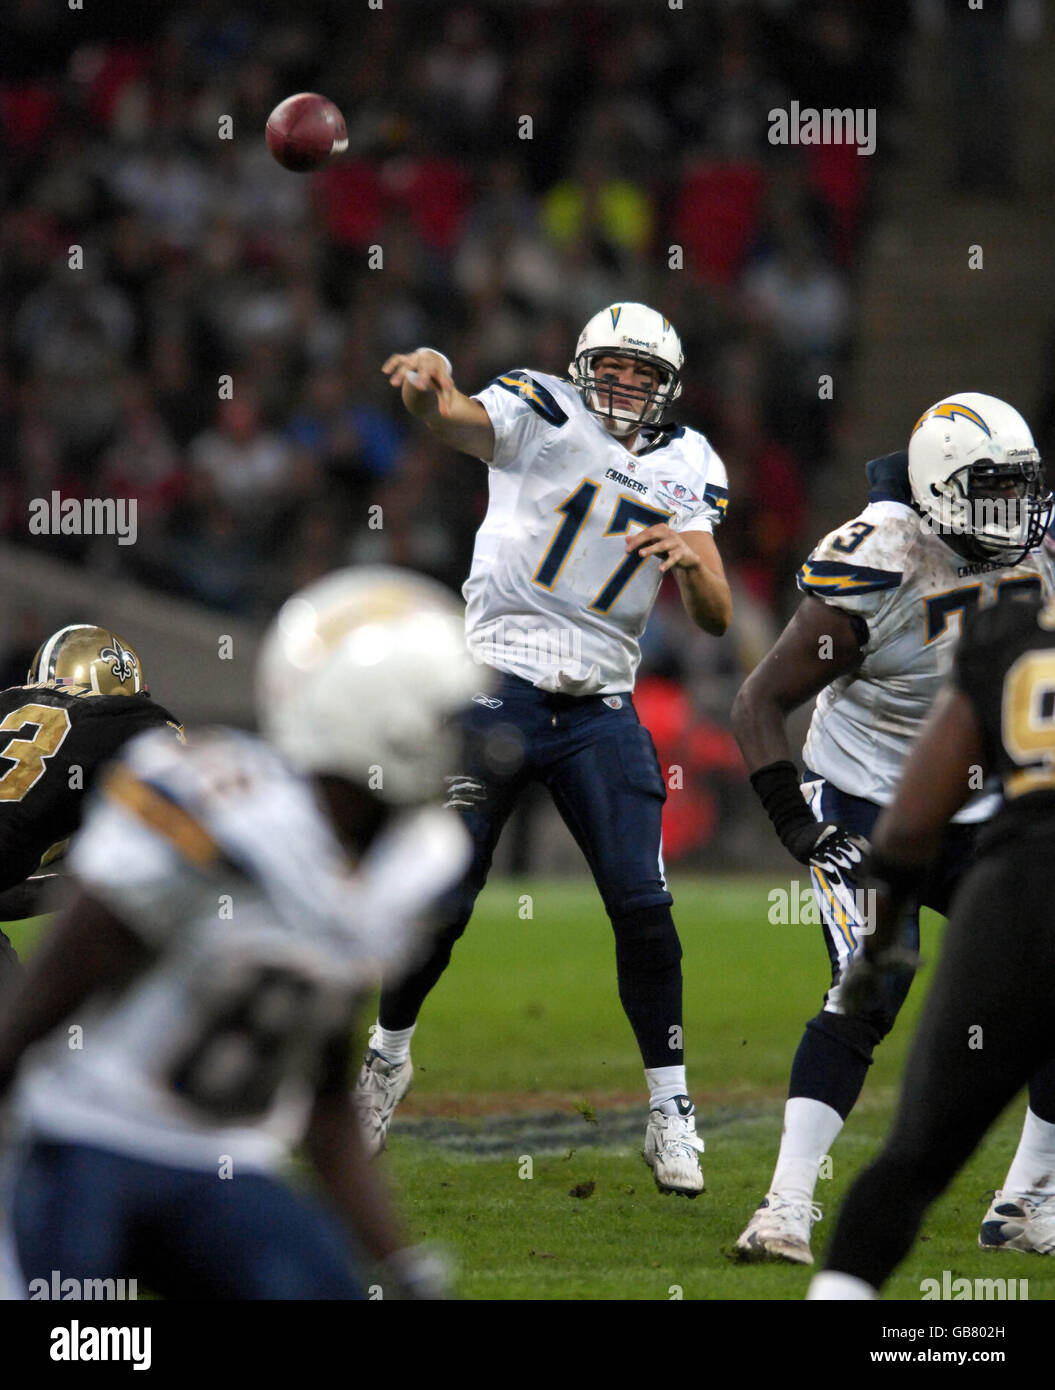 American Football - NFL - San Diego Chargers v New Orleans Saints - Wembley Stadium. San Diego Chargers Quarterback Philip Rivers attempts a throw during the NFL match at Wembley Stadium, London. Stock Photo